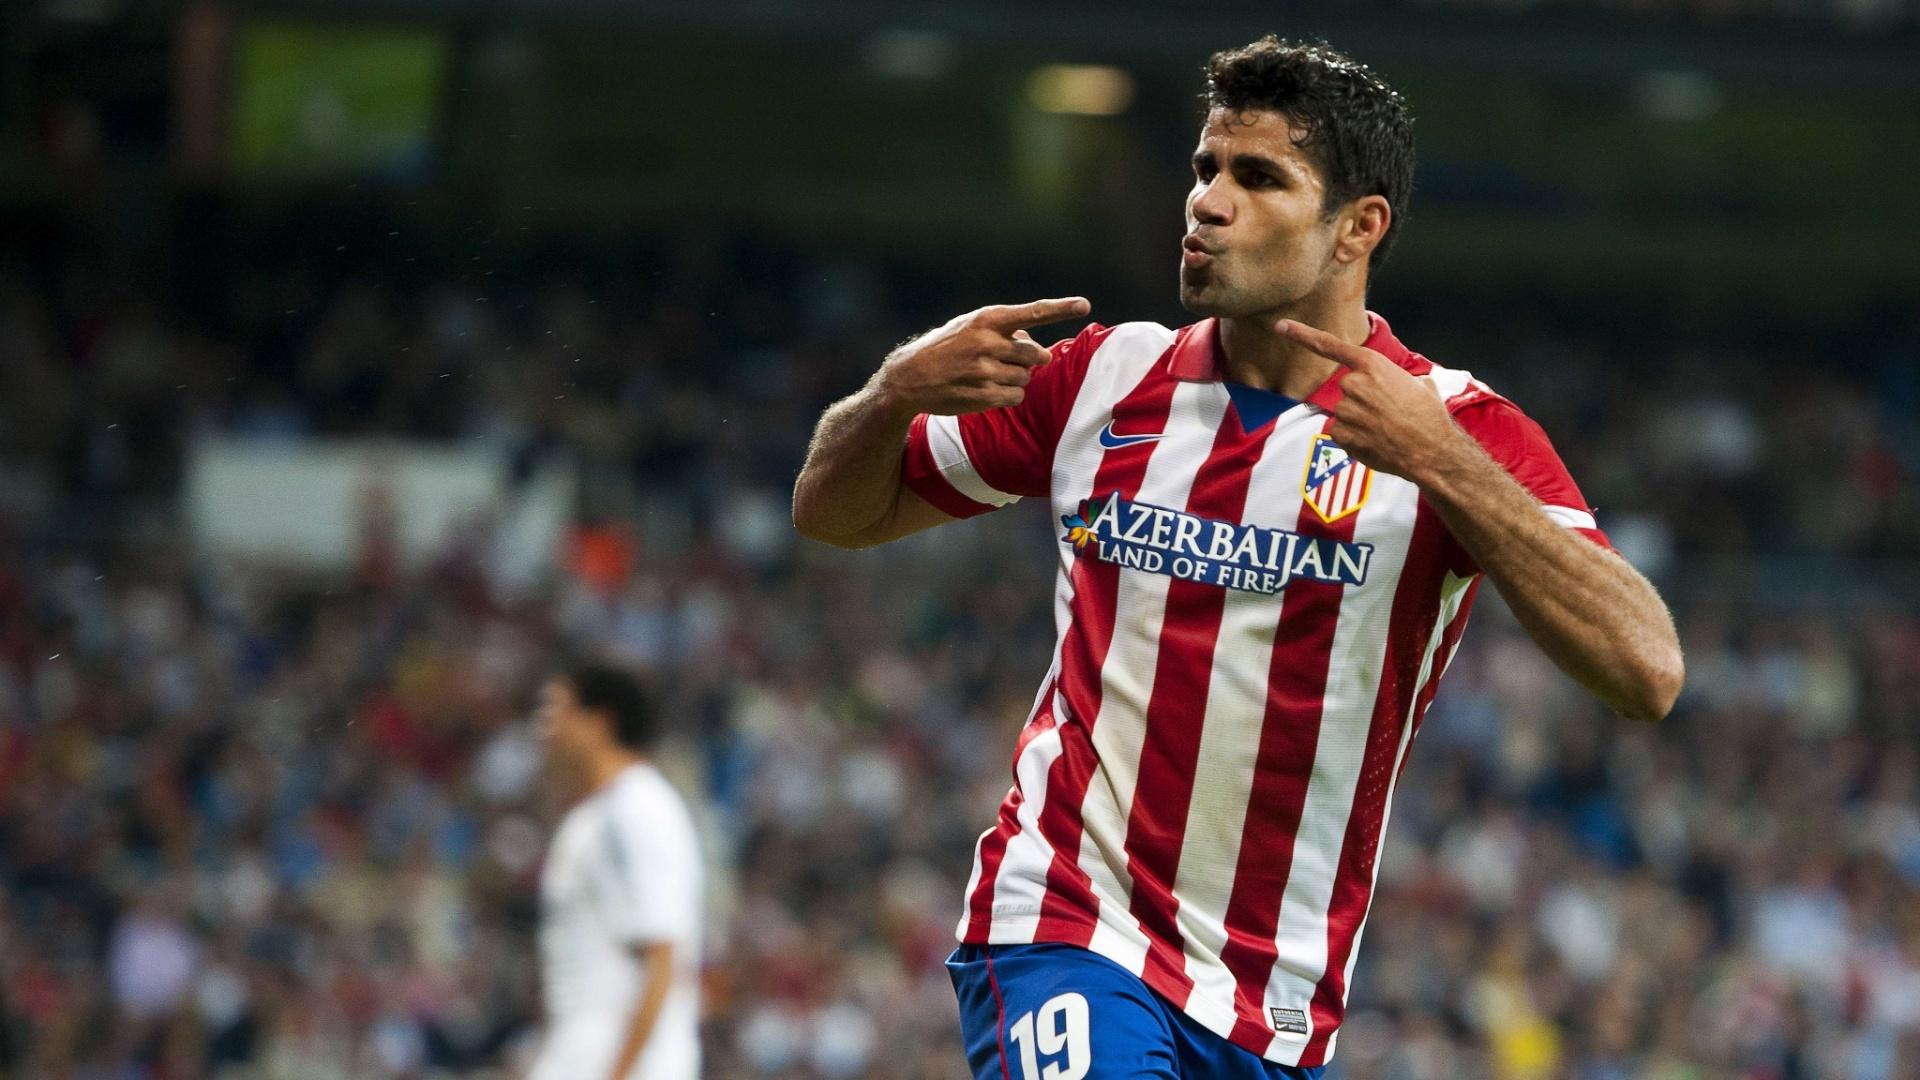 Diego Costa Atletico Madrid For Mobile (id: 160893)